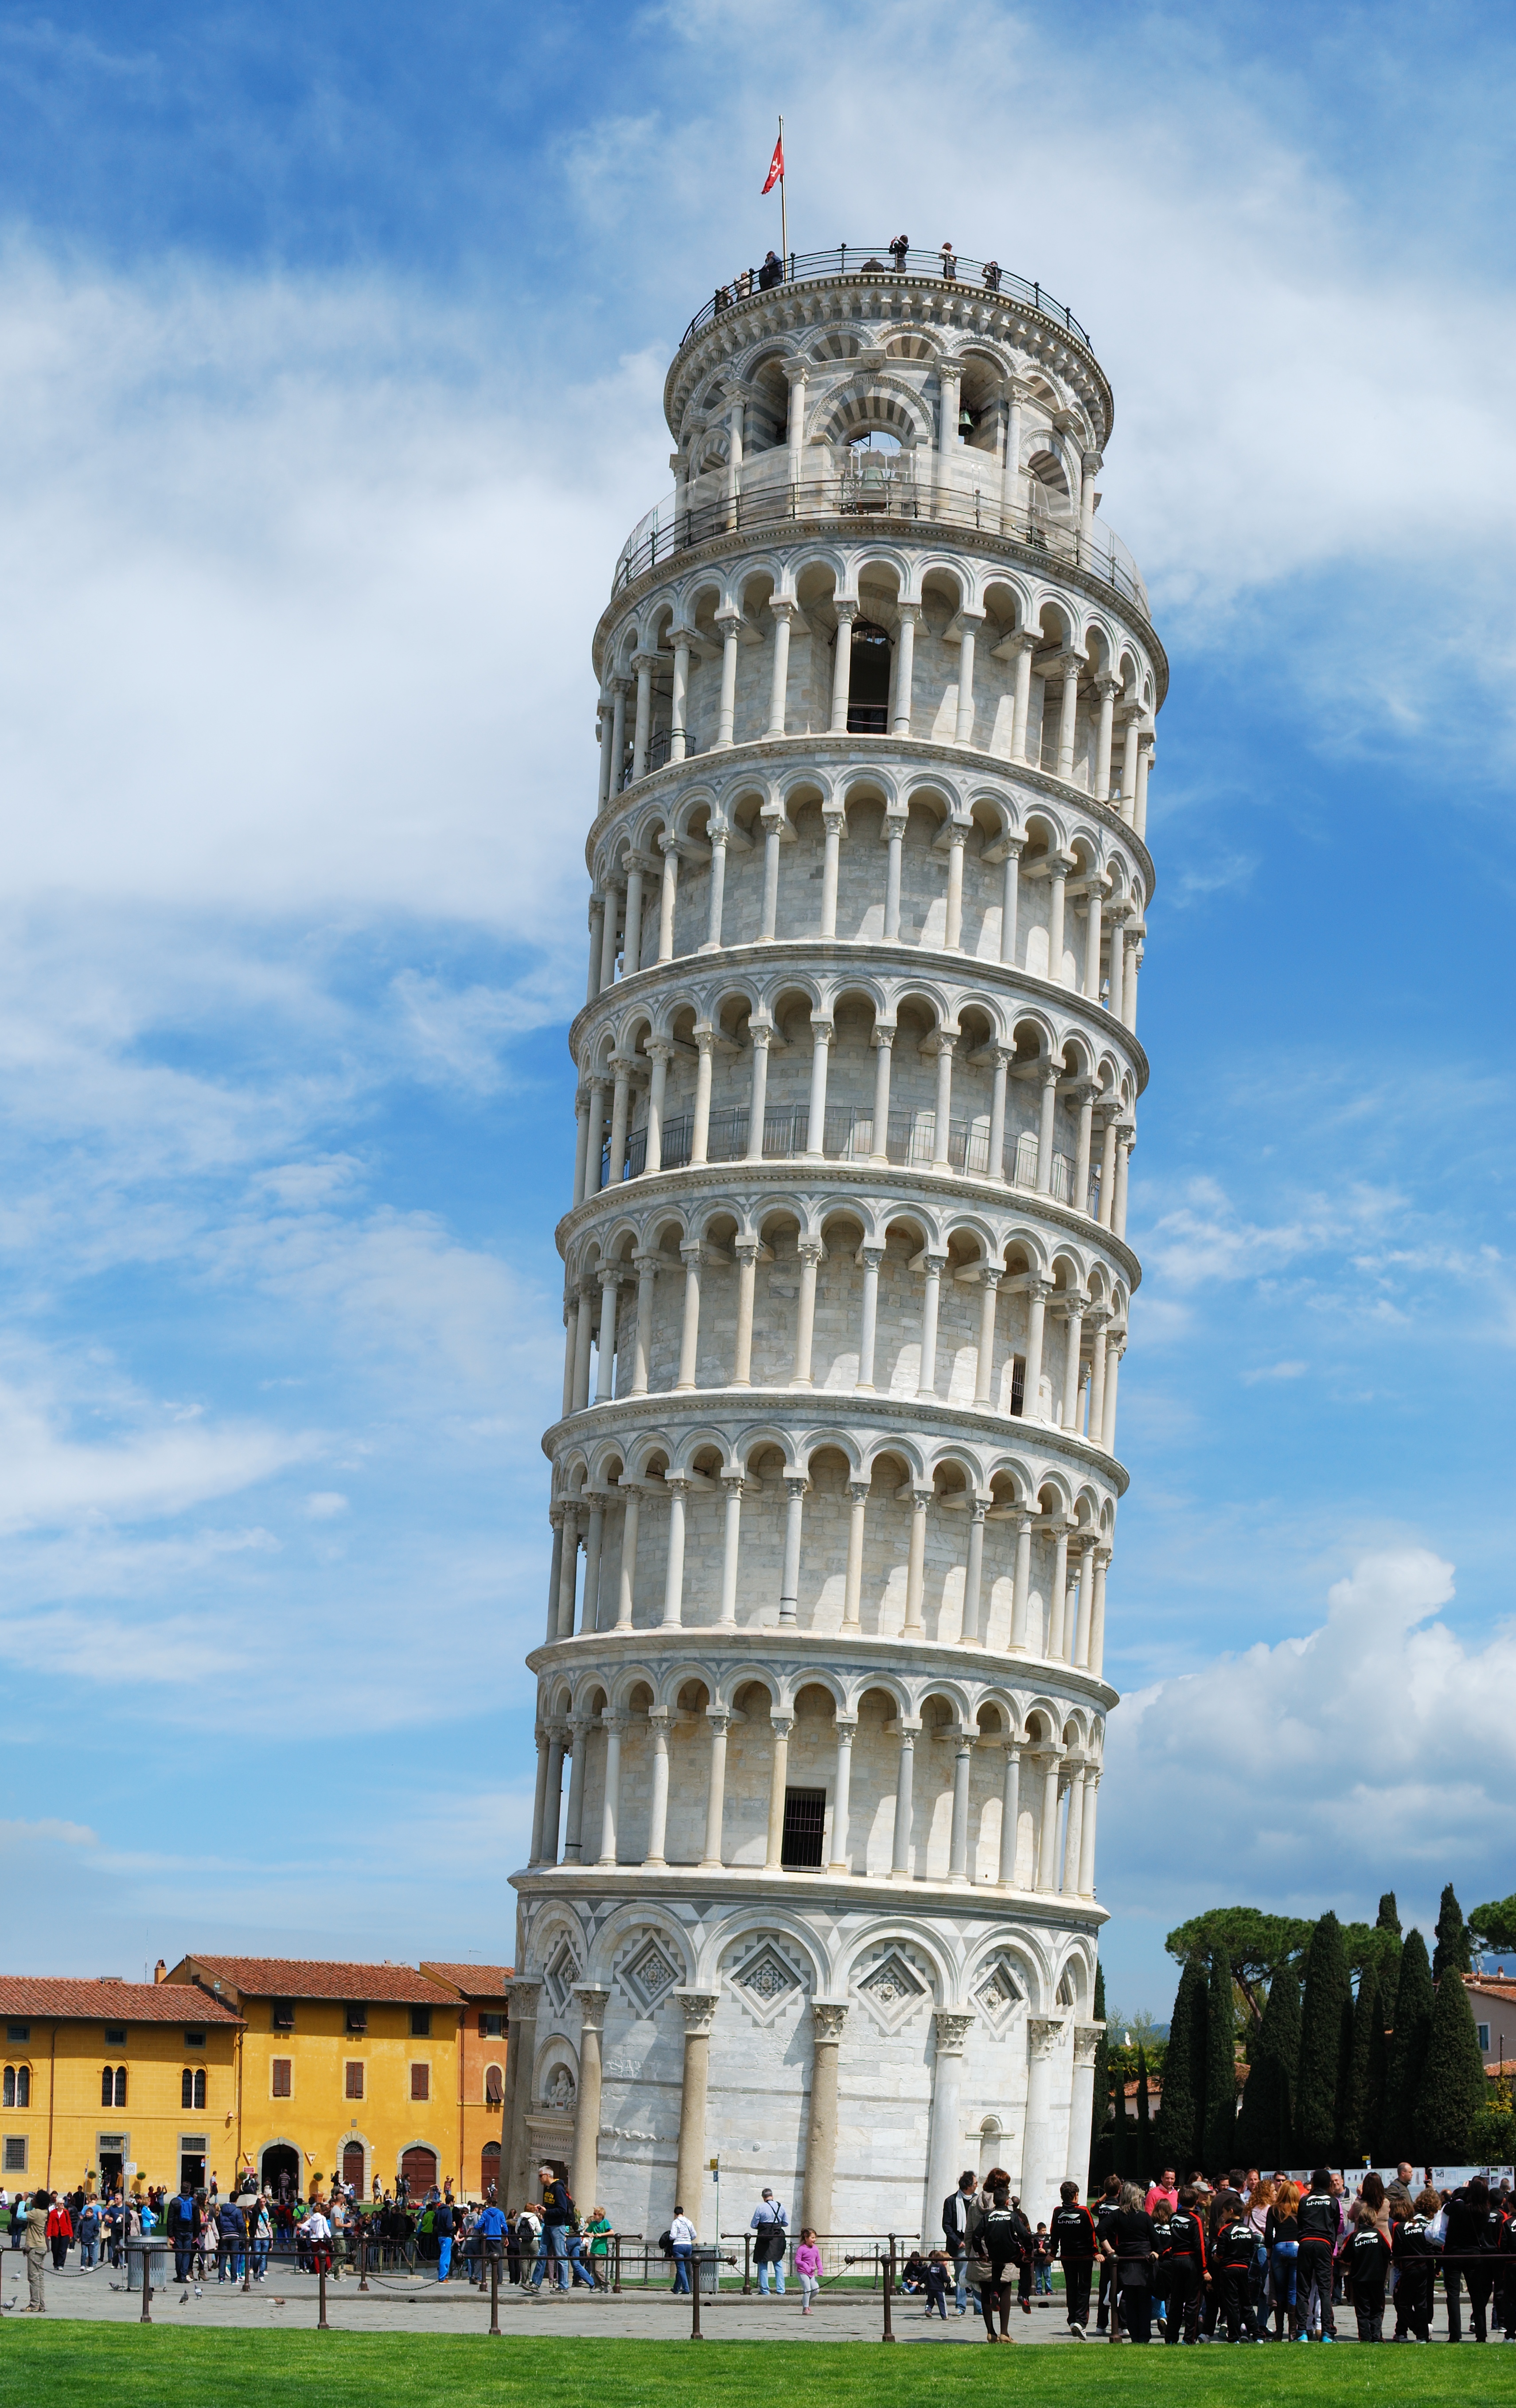 piza!!!!11 : r/PizzaTower